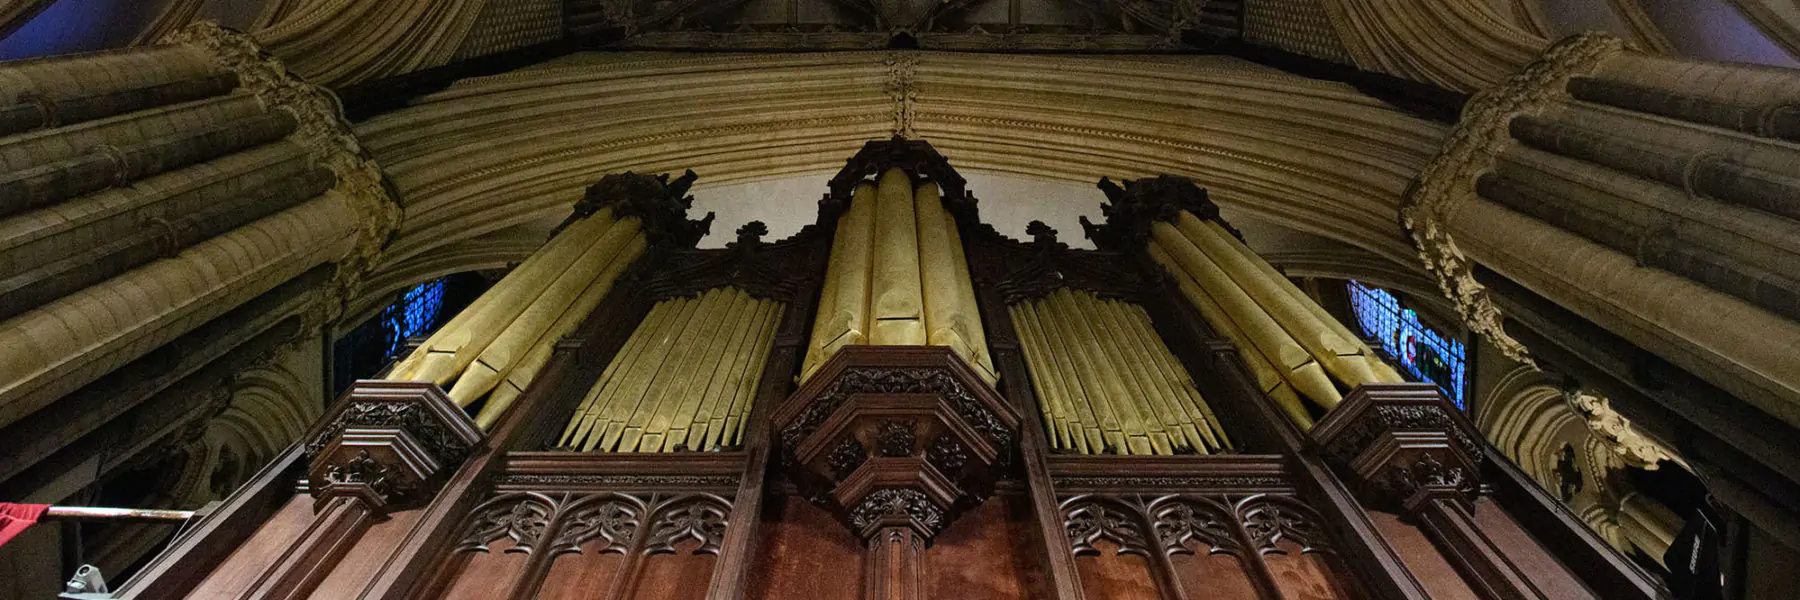 Father Willis Organ | Lincoln Cathedral